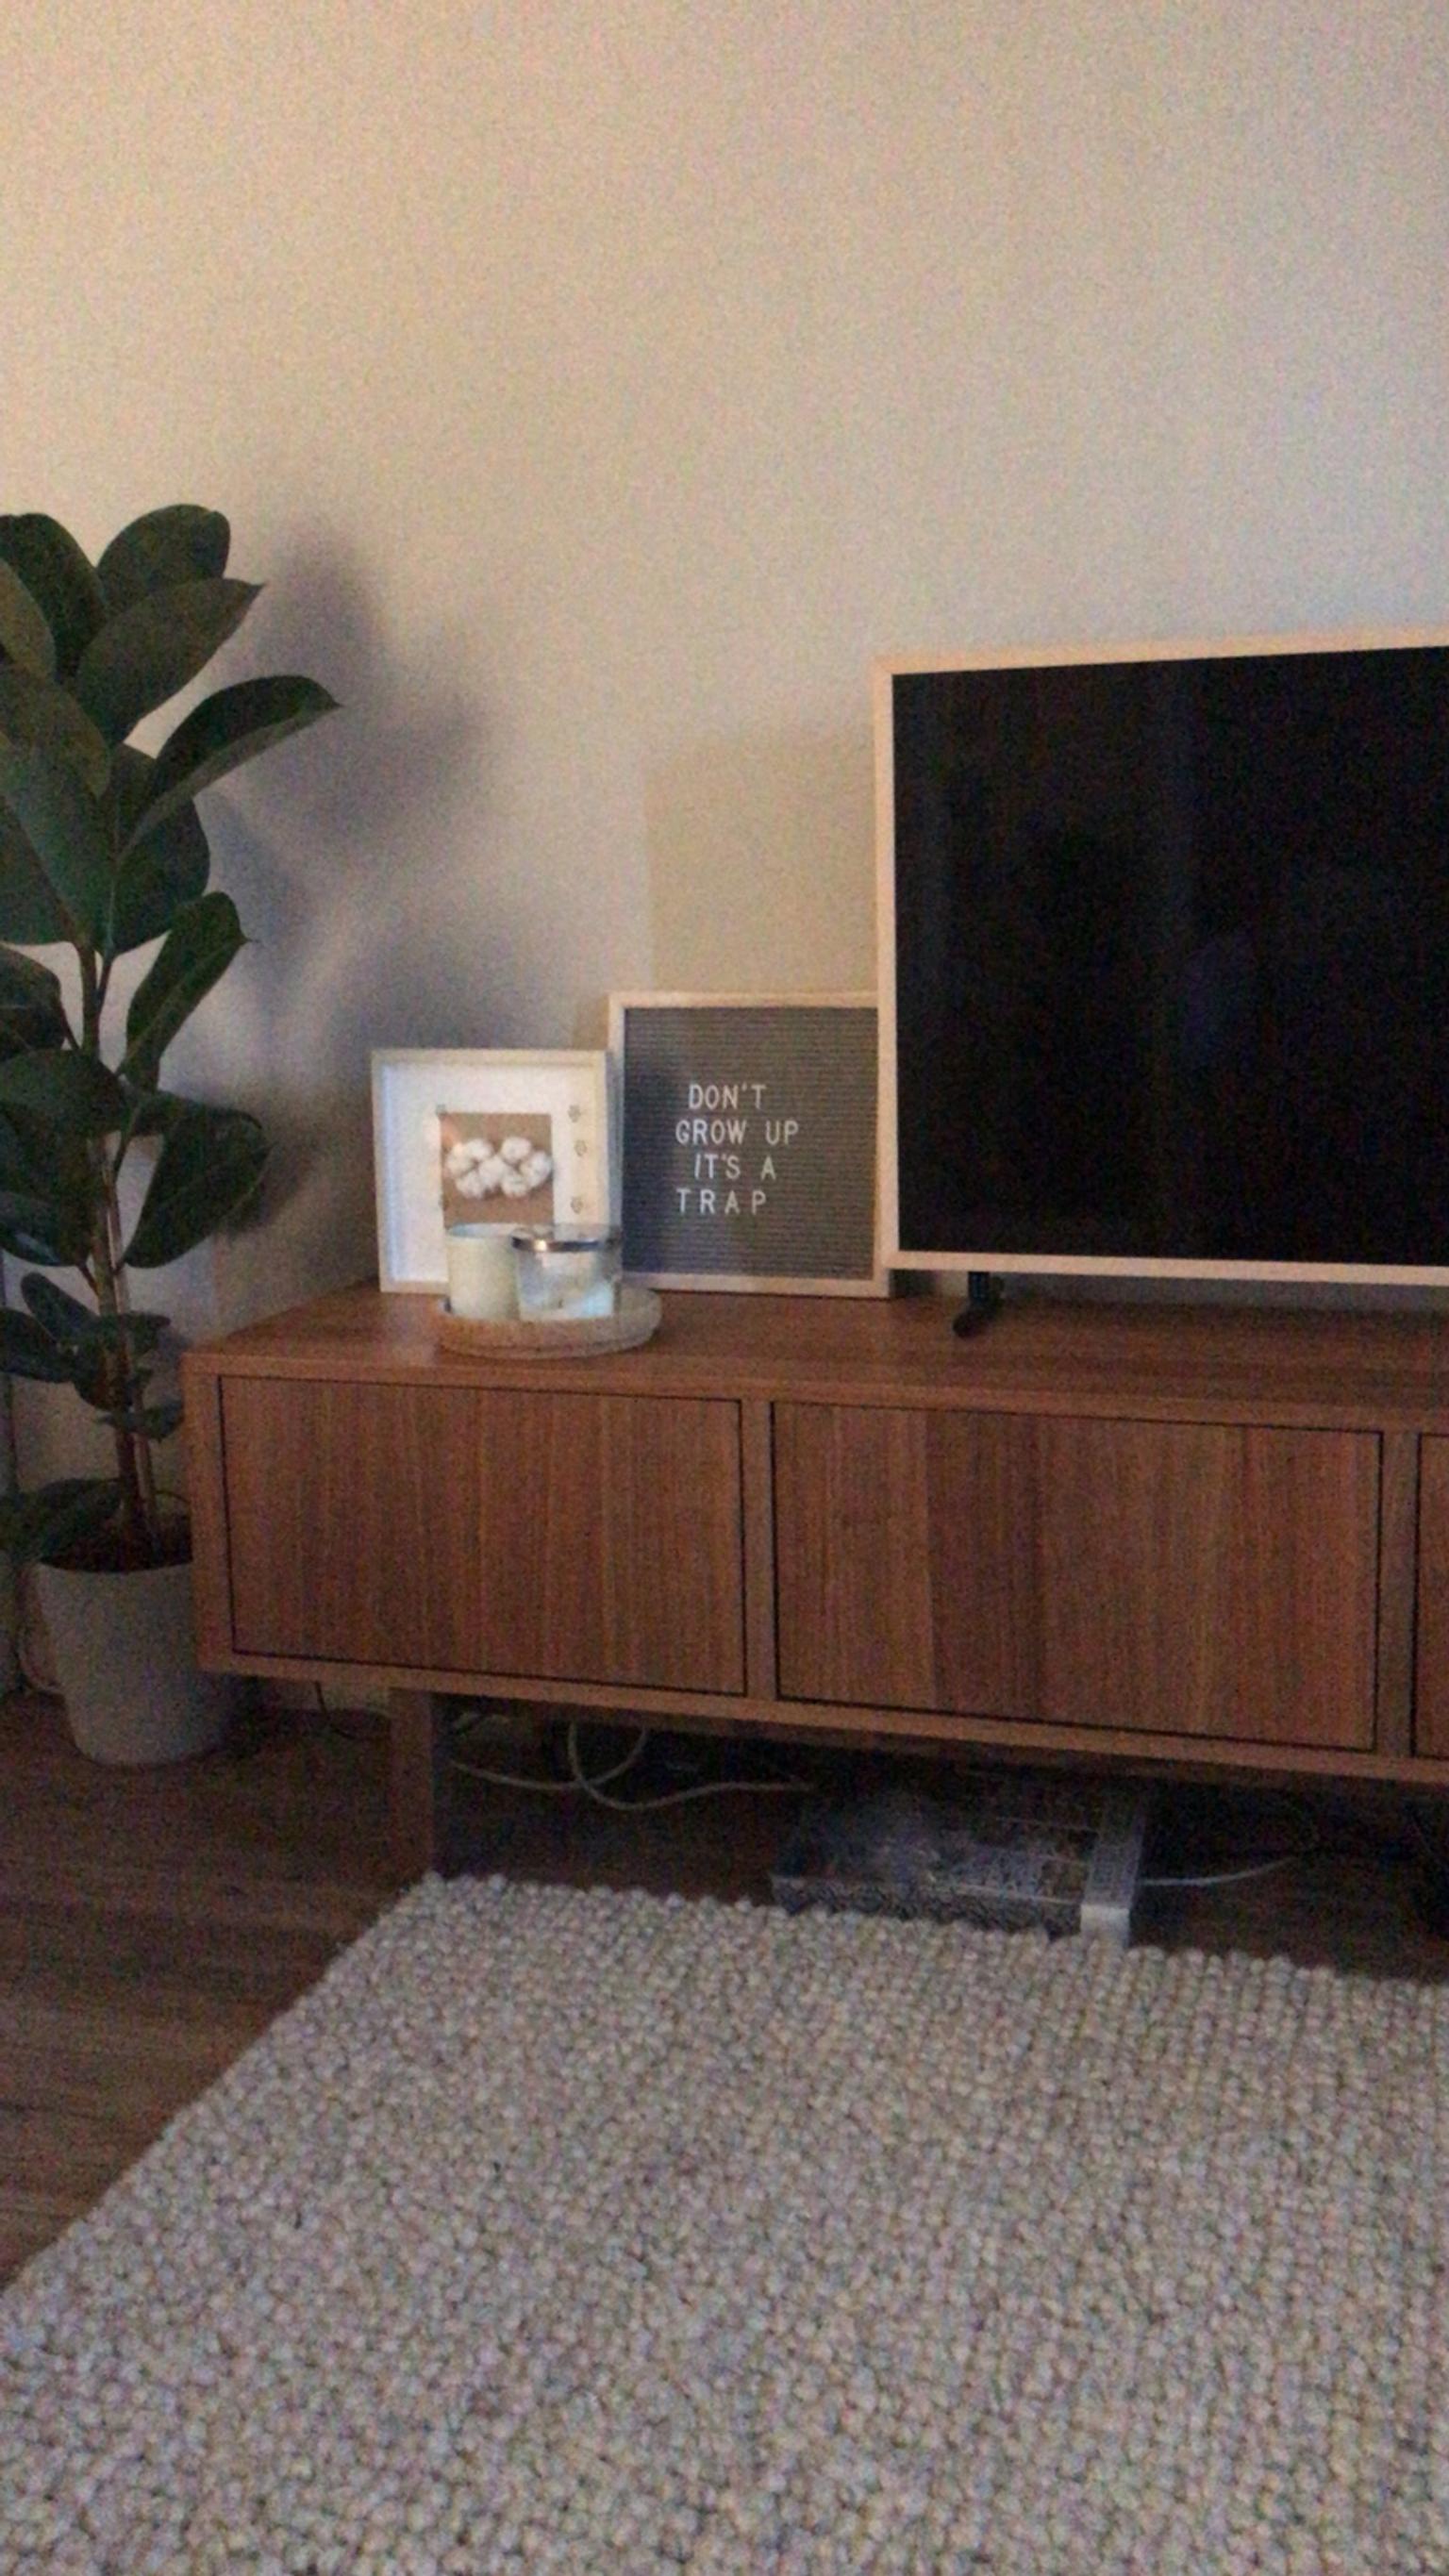 Ikea Stockholm Tv Stand In Se16 London For 50 00 For Sale Shpock